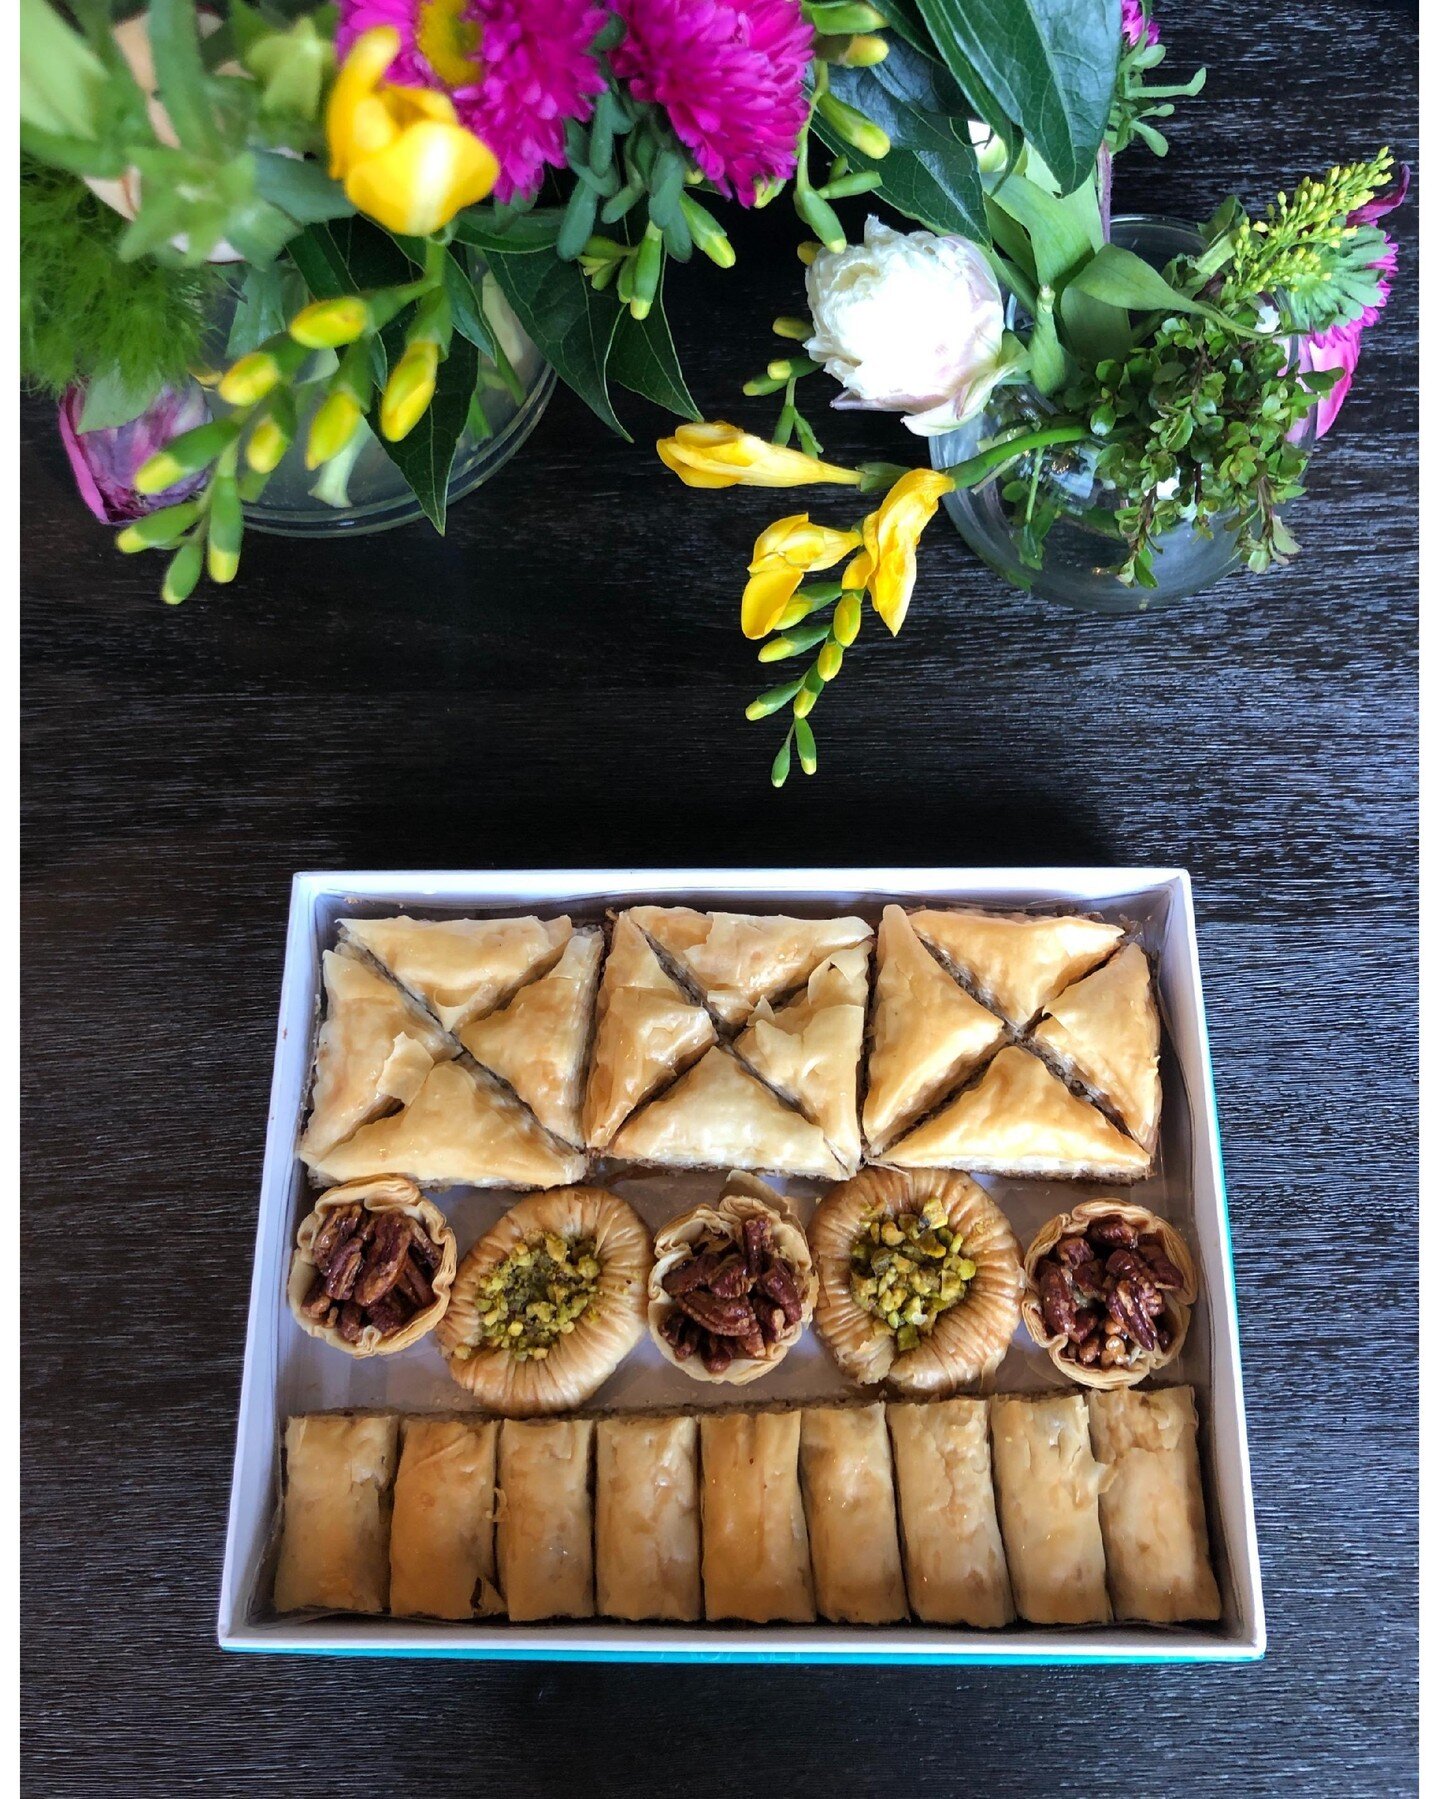 In charge of bringing the dessert for your holiday weekend celebrations? We've got your covered with our crowd pleasing Baklava Variety Box!

They're available for purchase at the cafe and on our website in sizes Small and Large.

To confirm current 